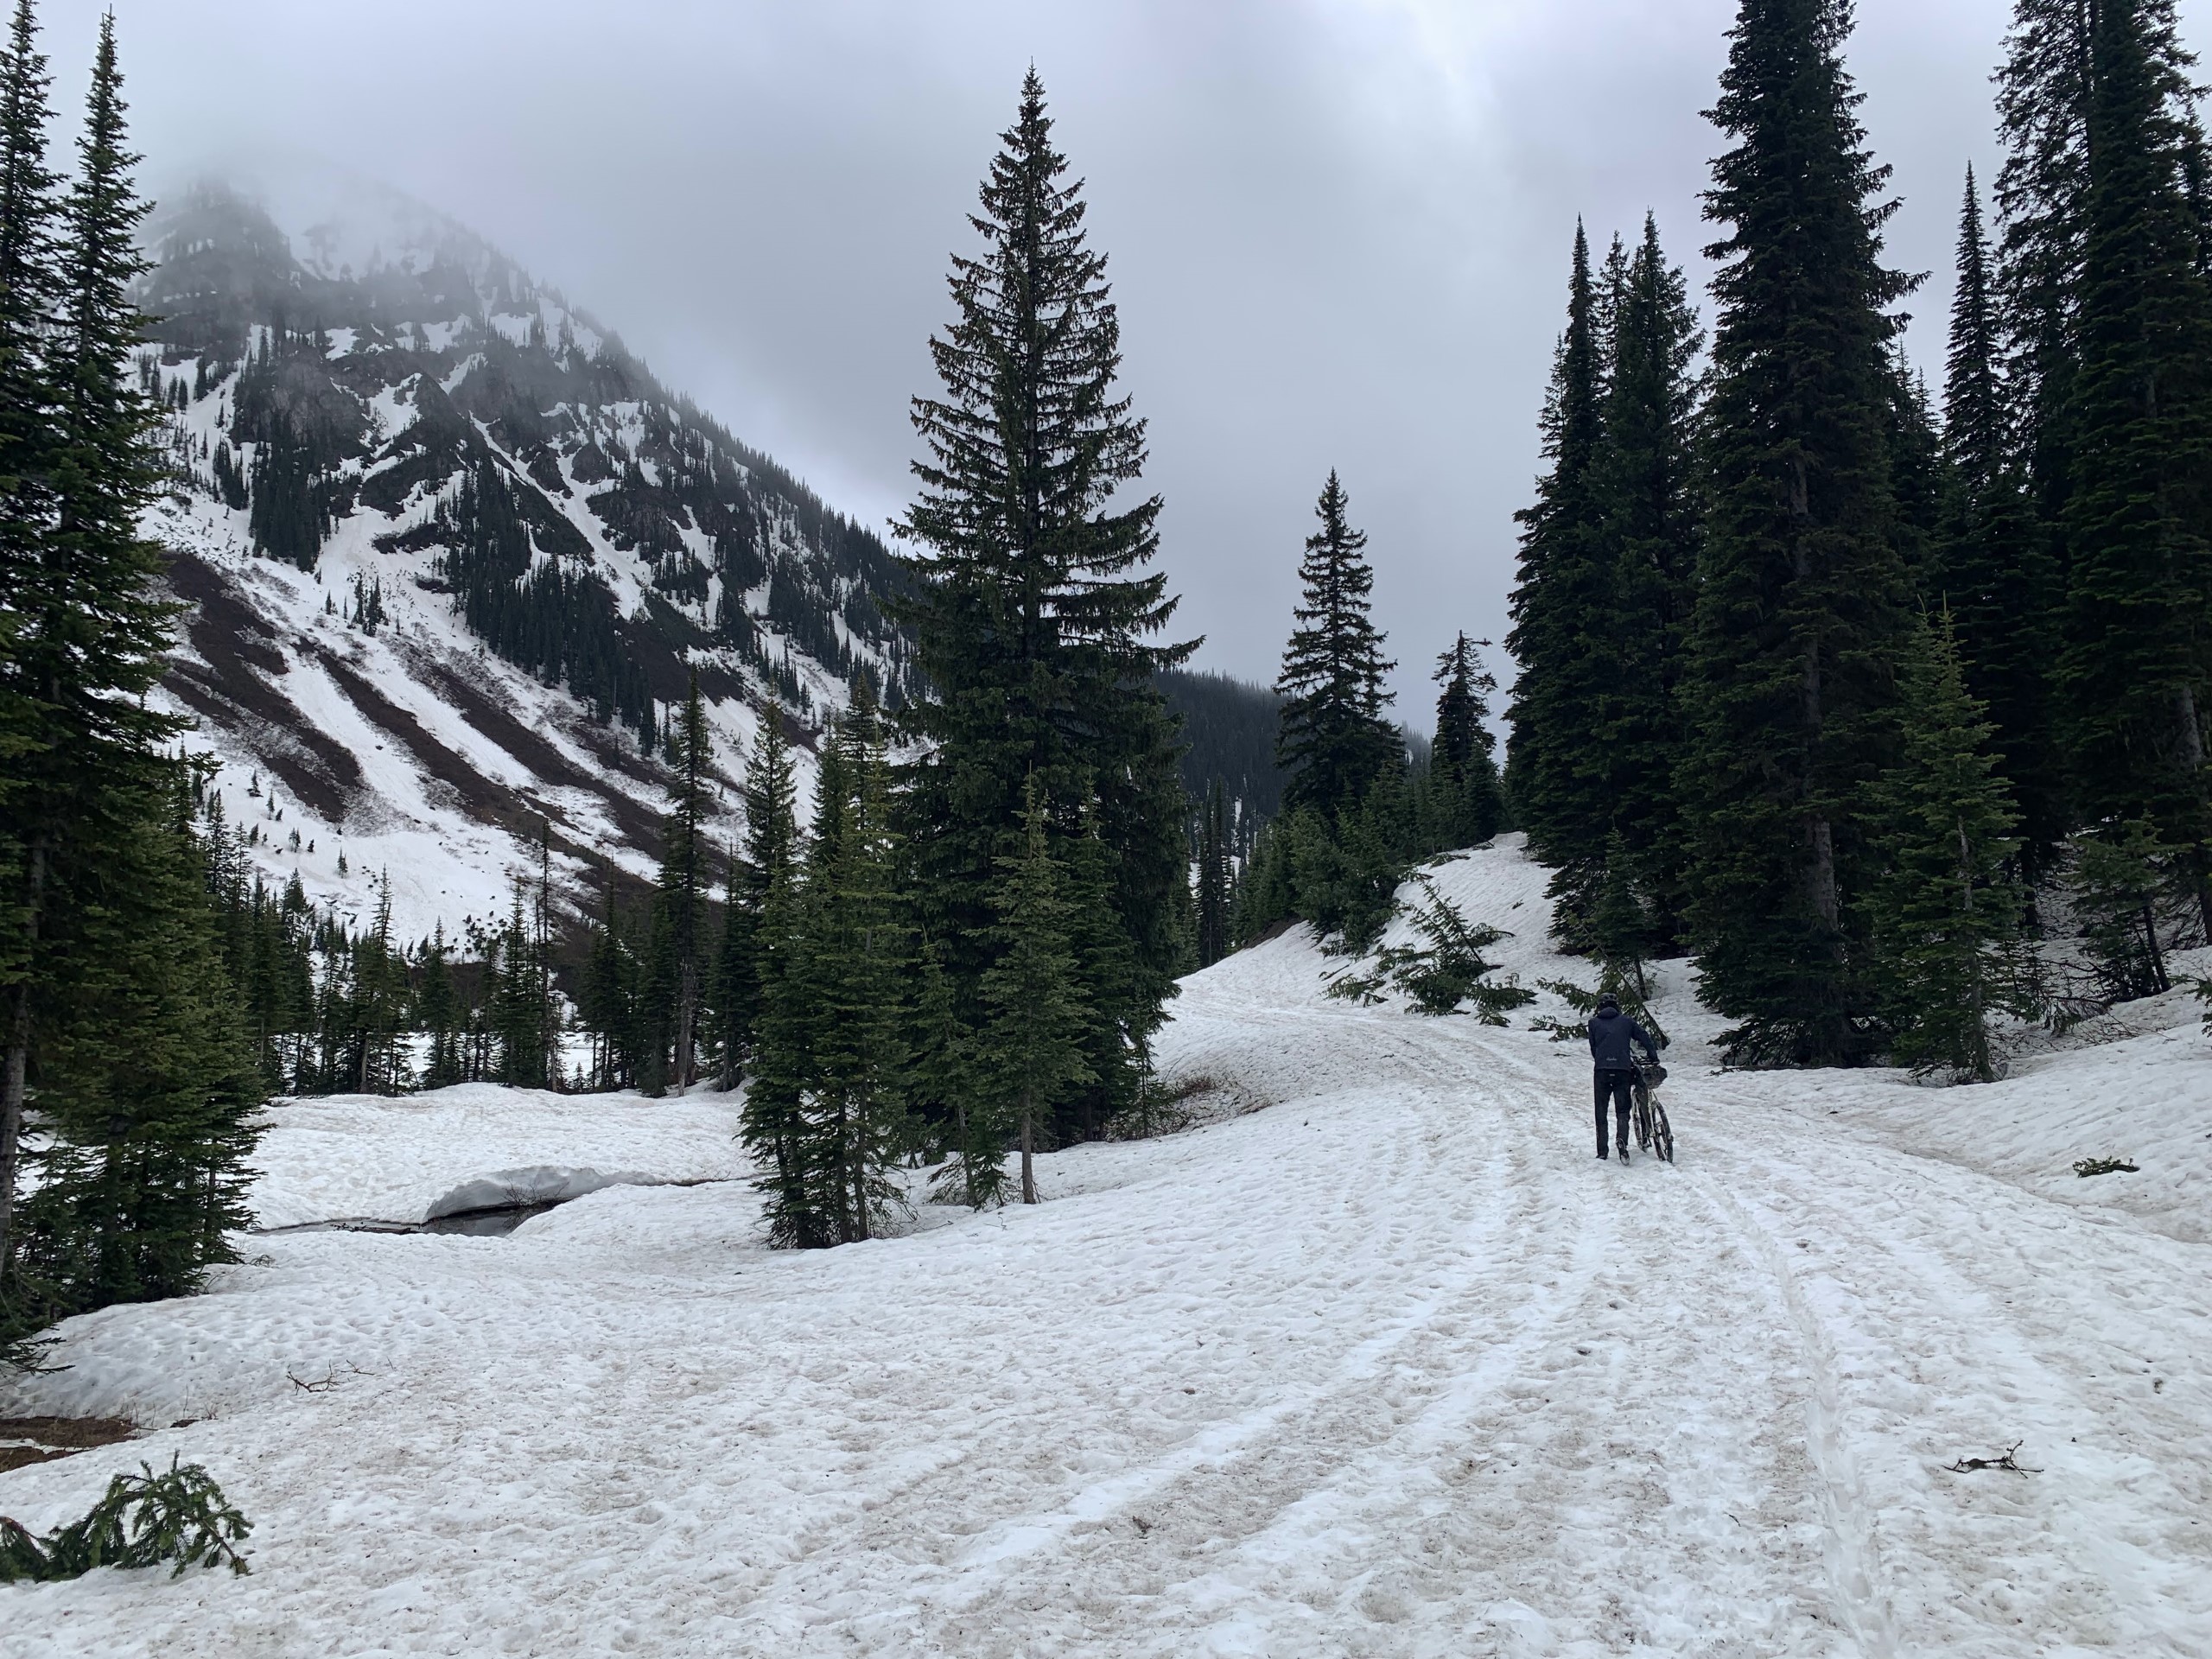 A major challenge in the Tour Divide this year was snow.